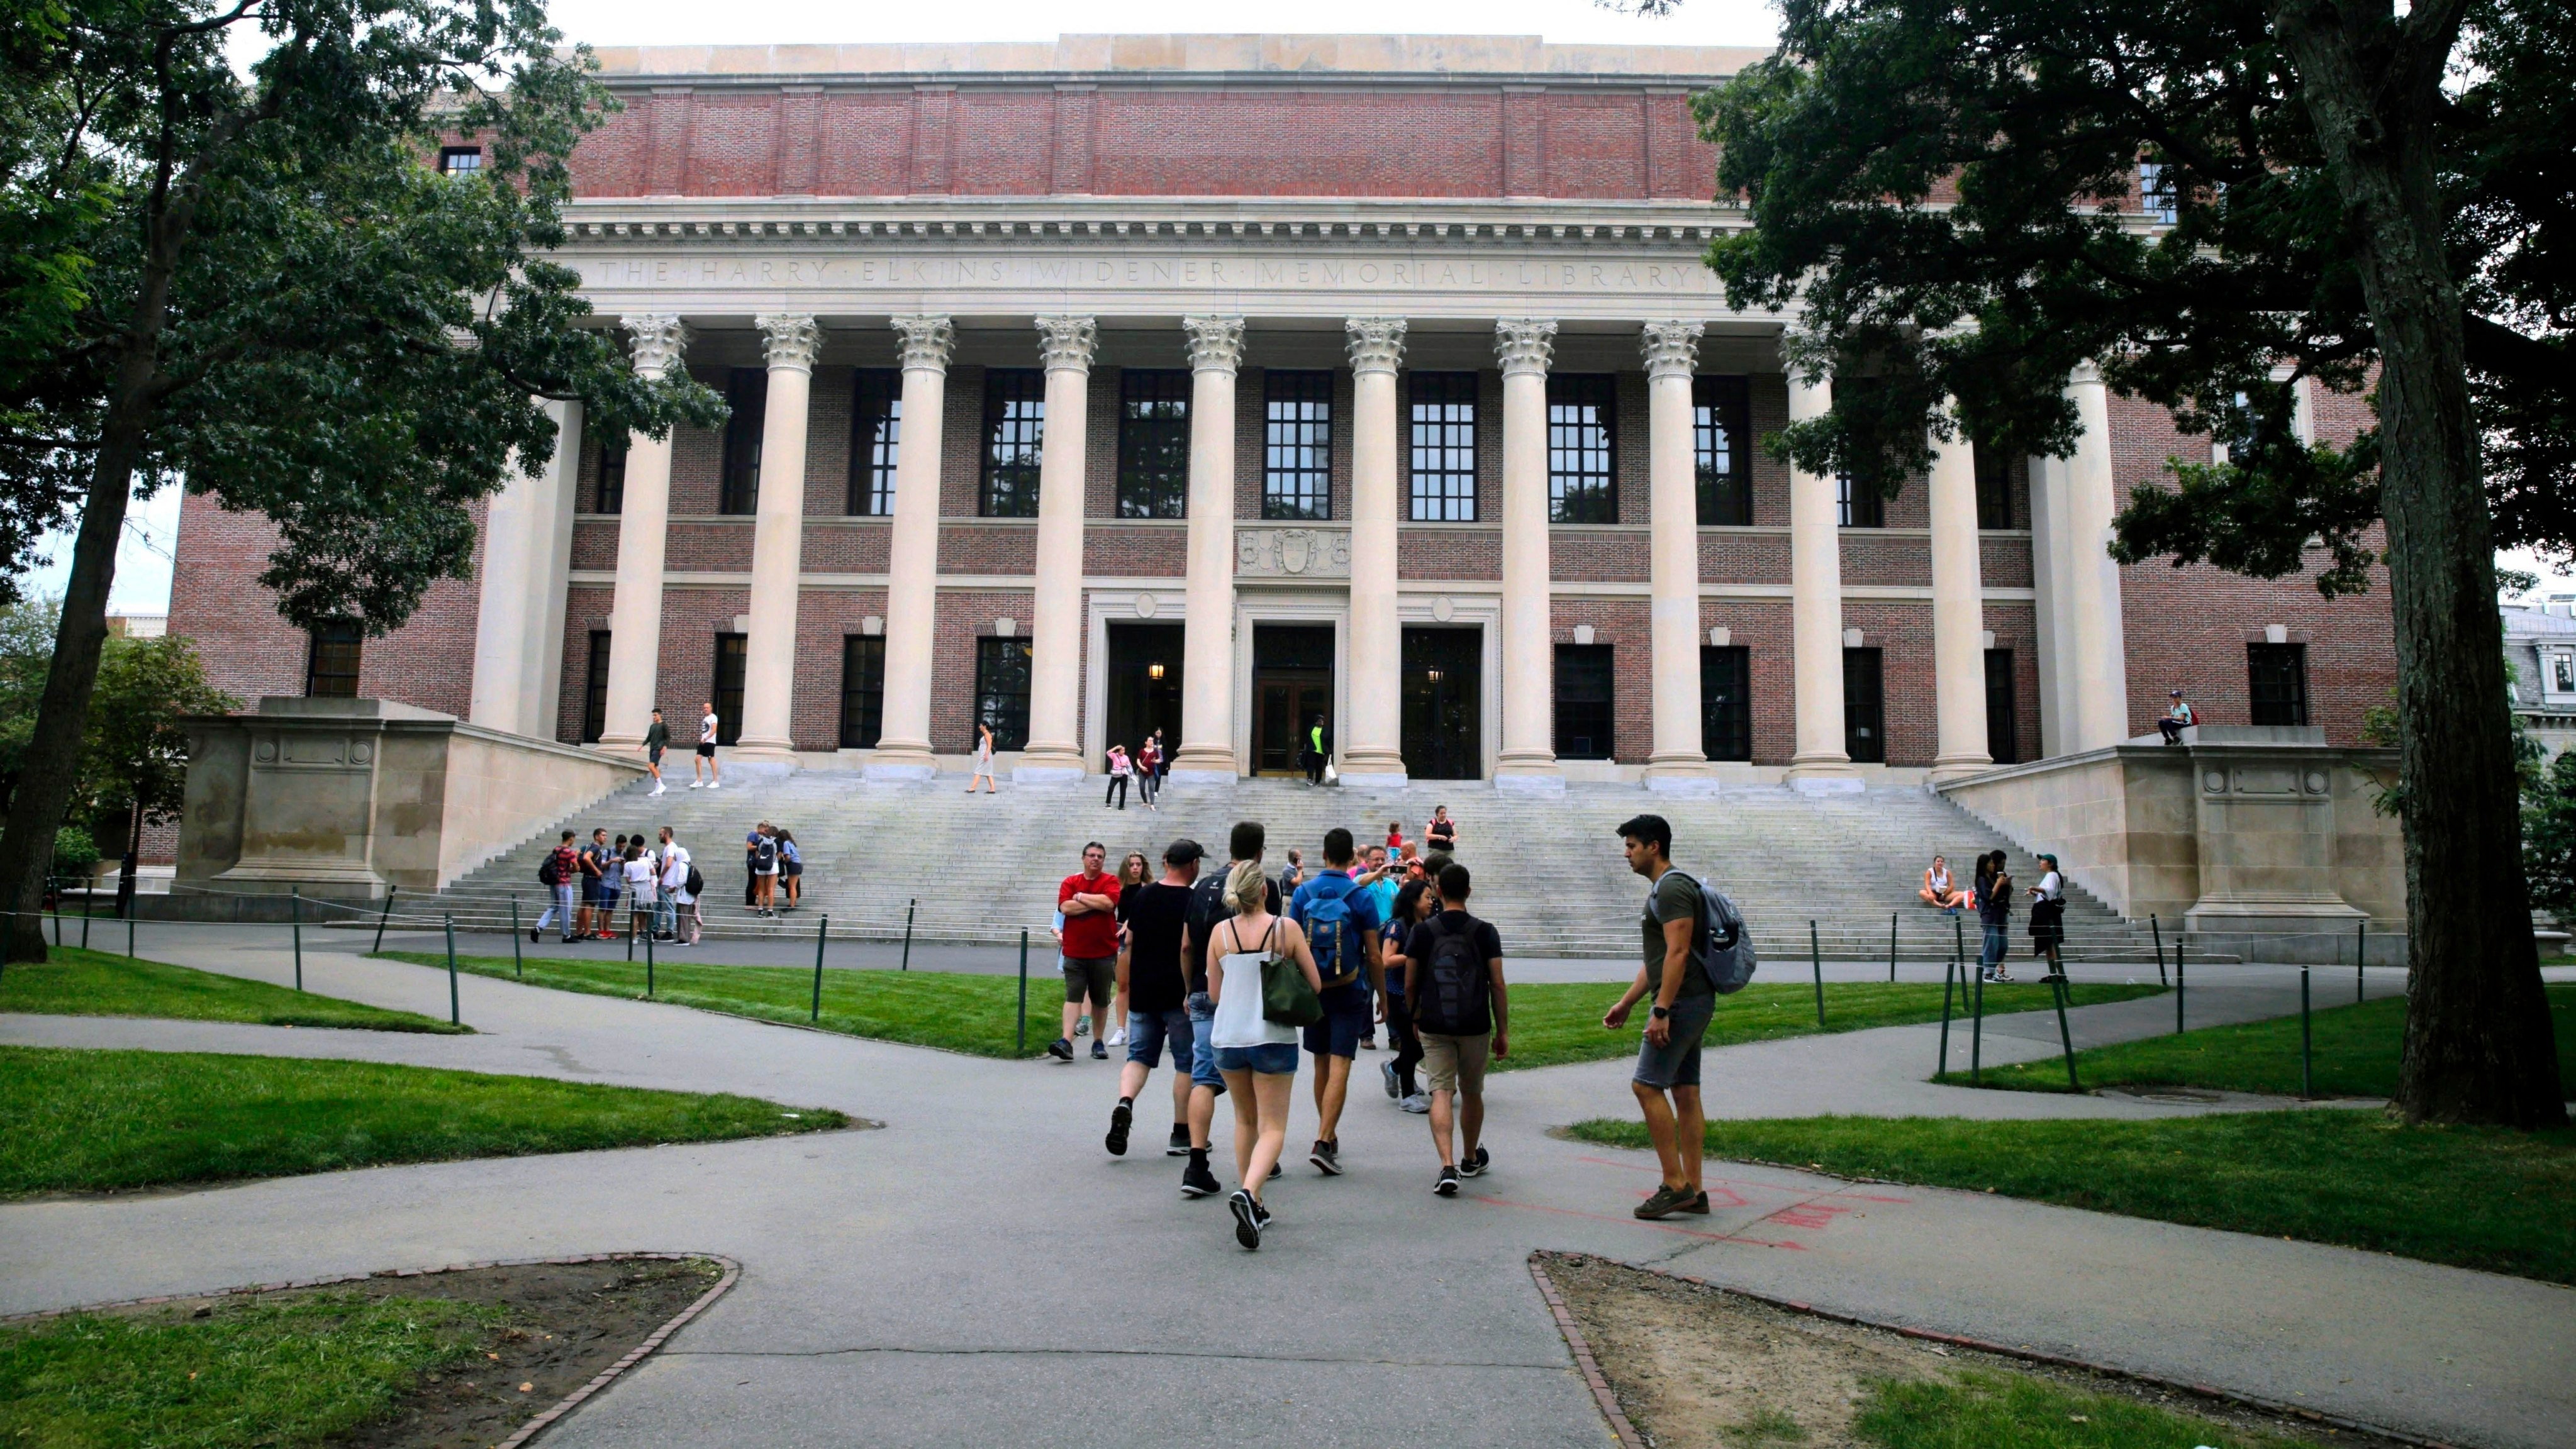 US universities such as Harvard (pictured) may be more used to accepting students with American high school qualifications, but those institutions interested in recruiting the best and brightest from abroad have grown increasingly switched on to gauging student potential based on applications from different systems. Photo: AP Photo
